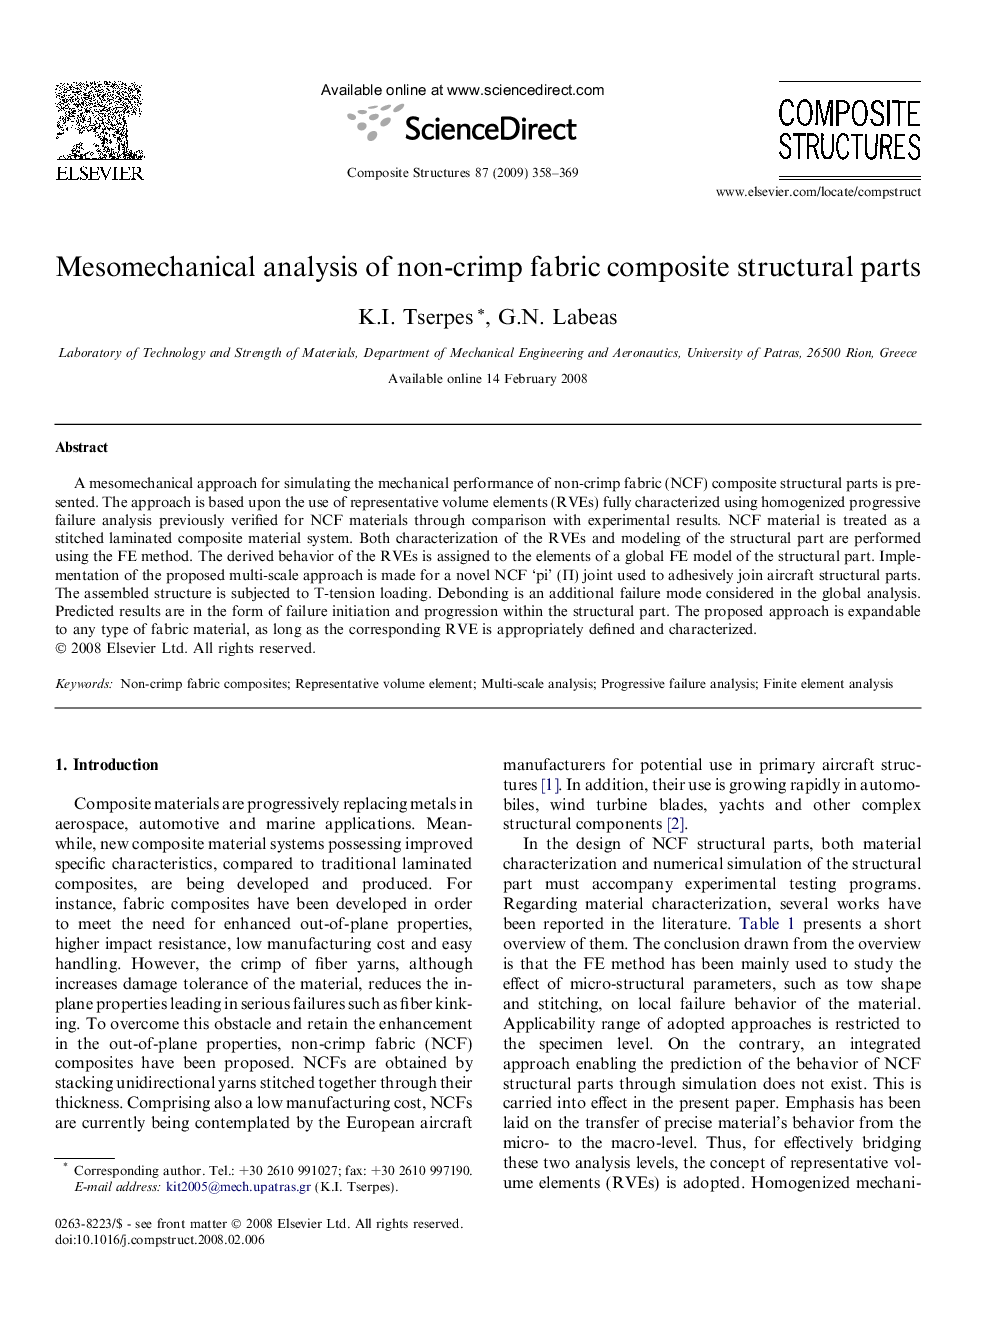 Mesomechanical analysis of non-crimp fabric composite structural parts